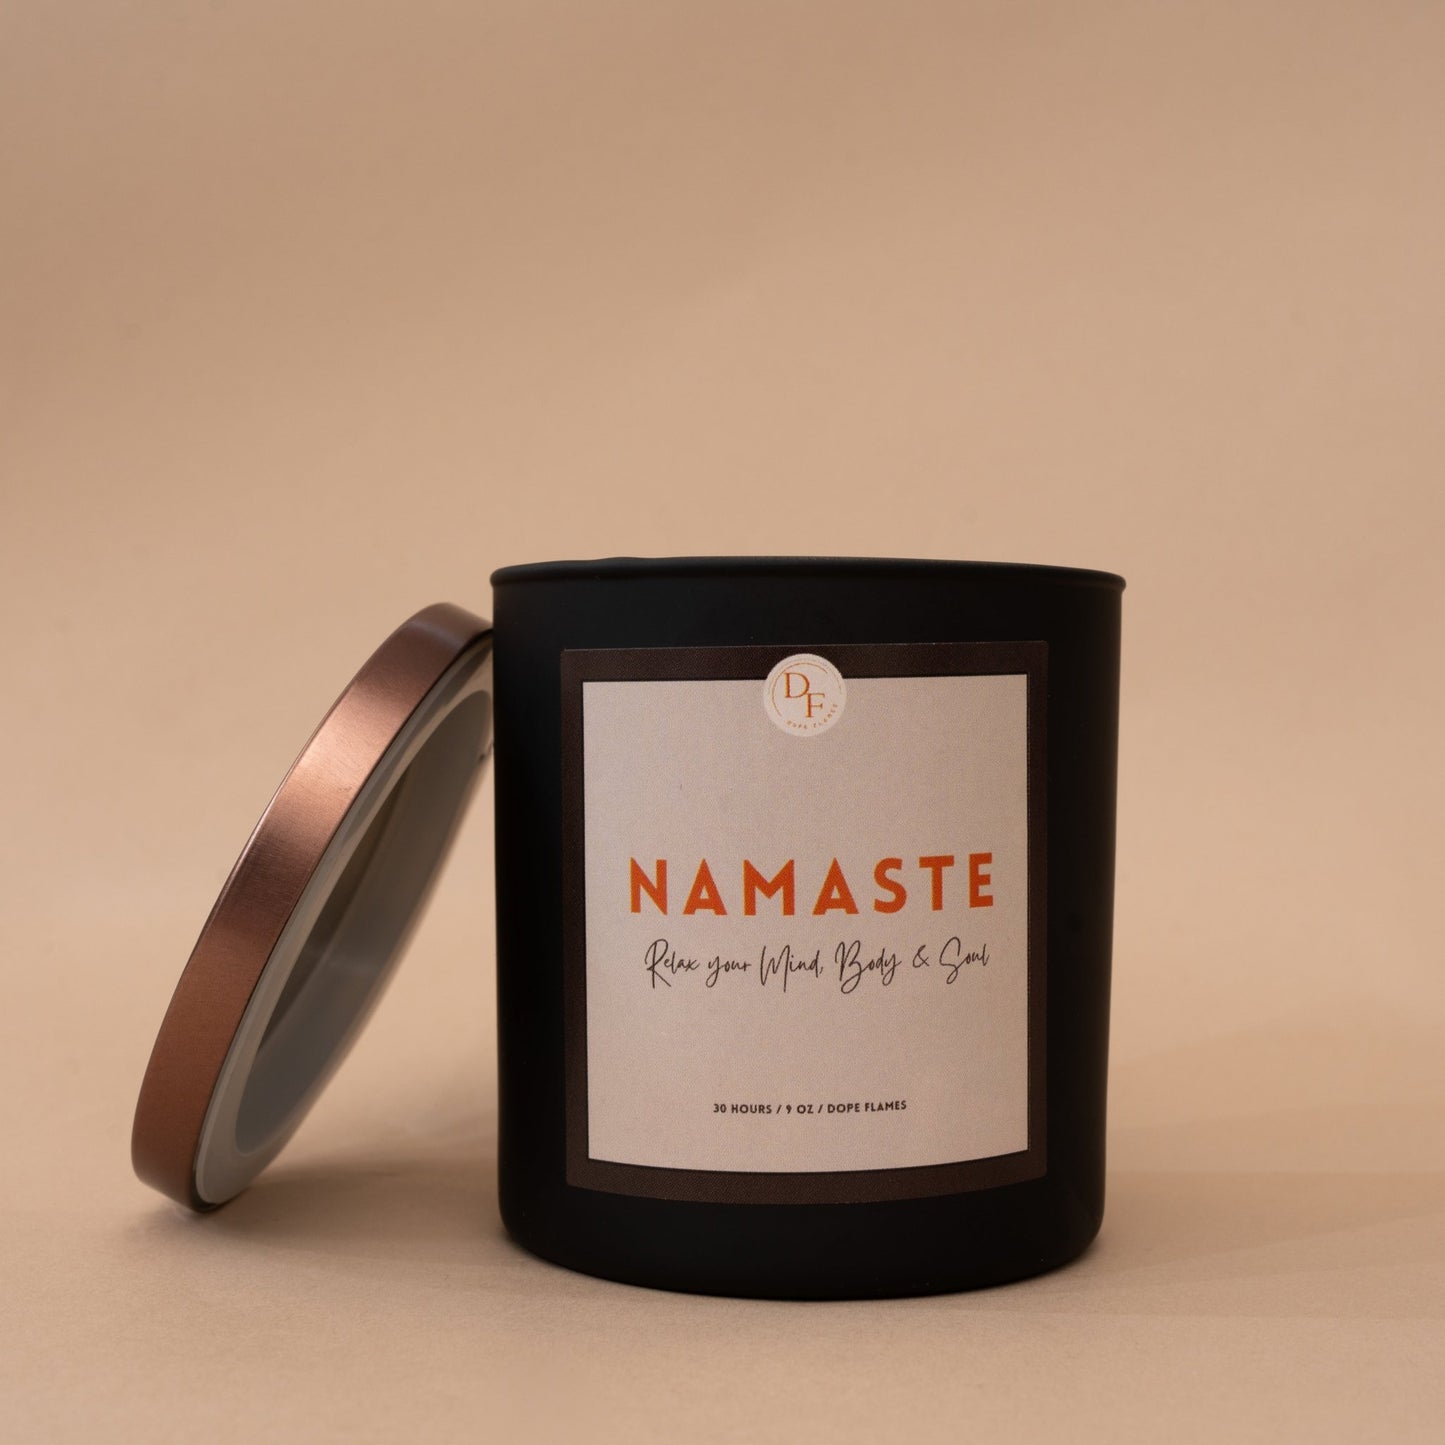 Namaste: Relax your Mind, Body, and Soul